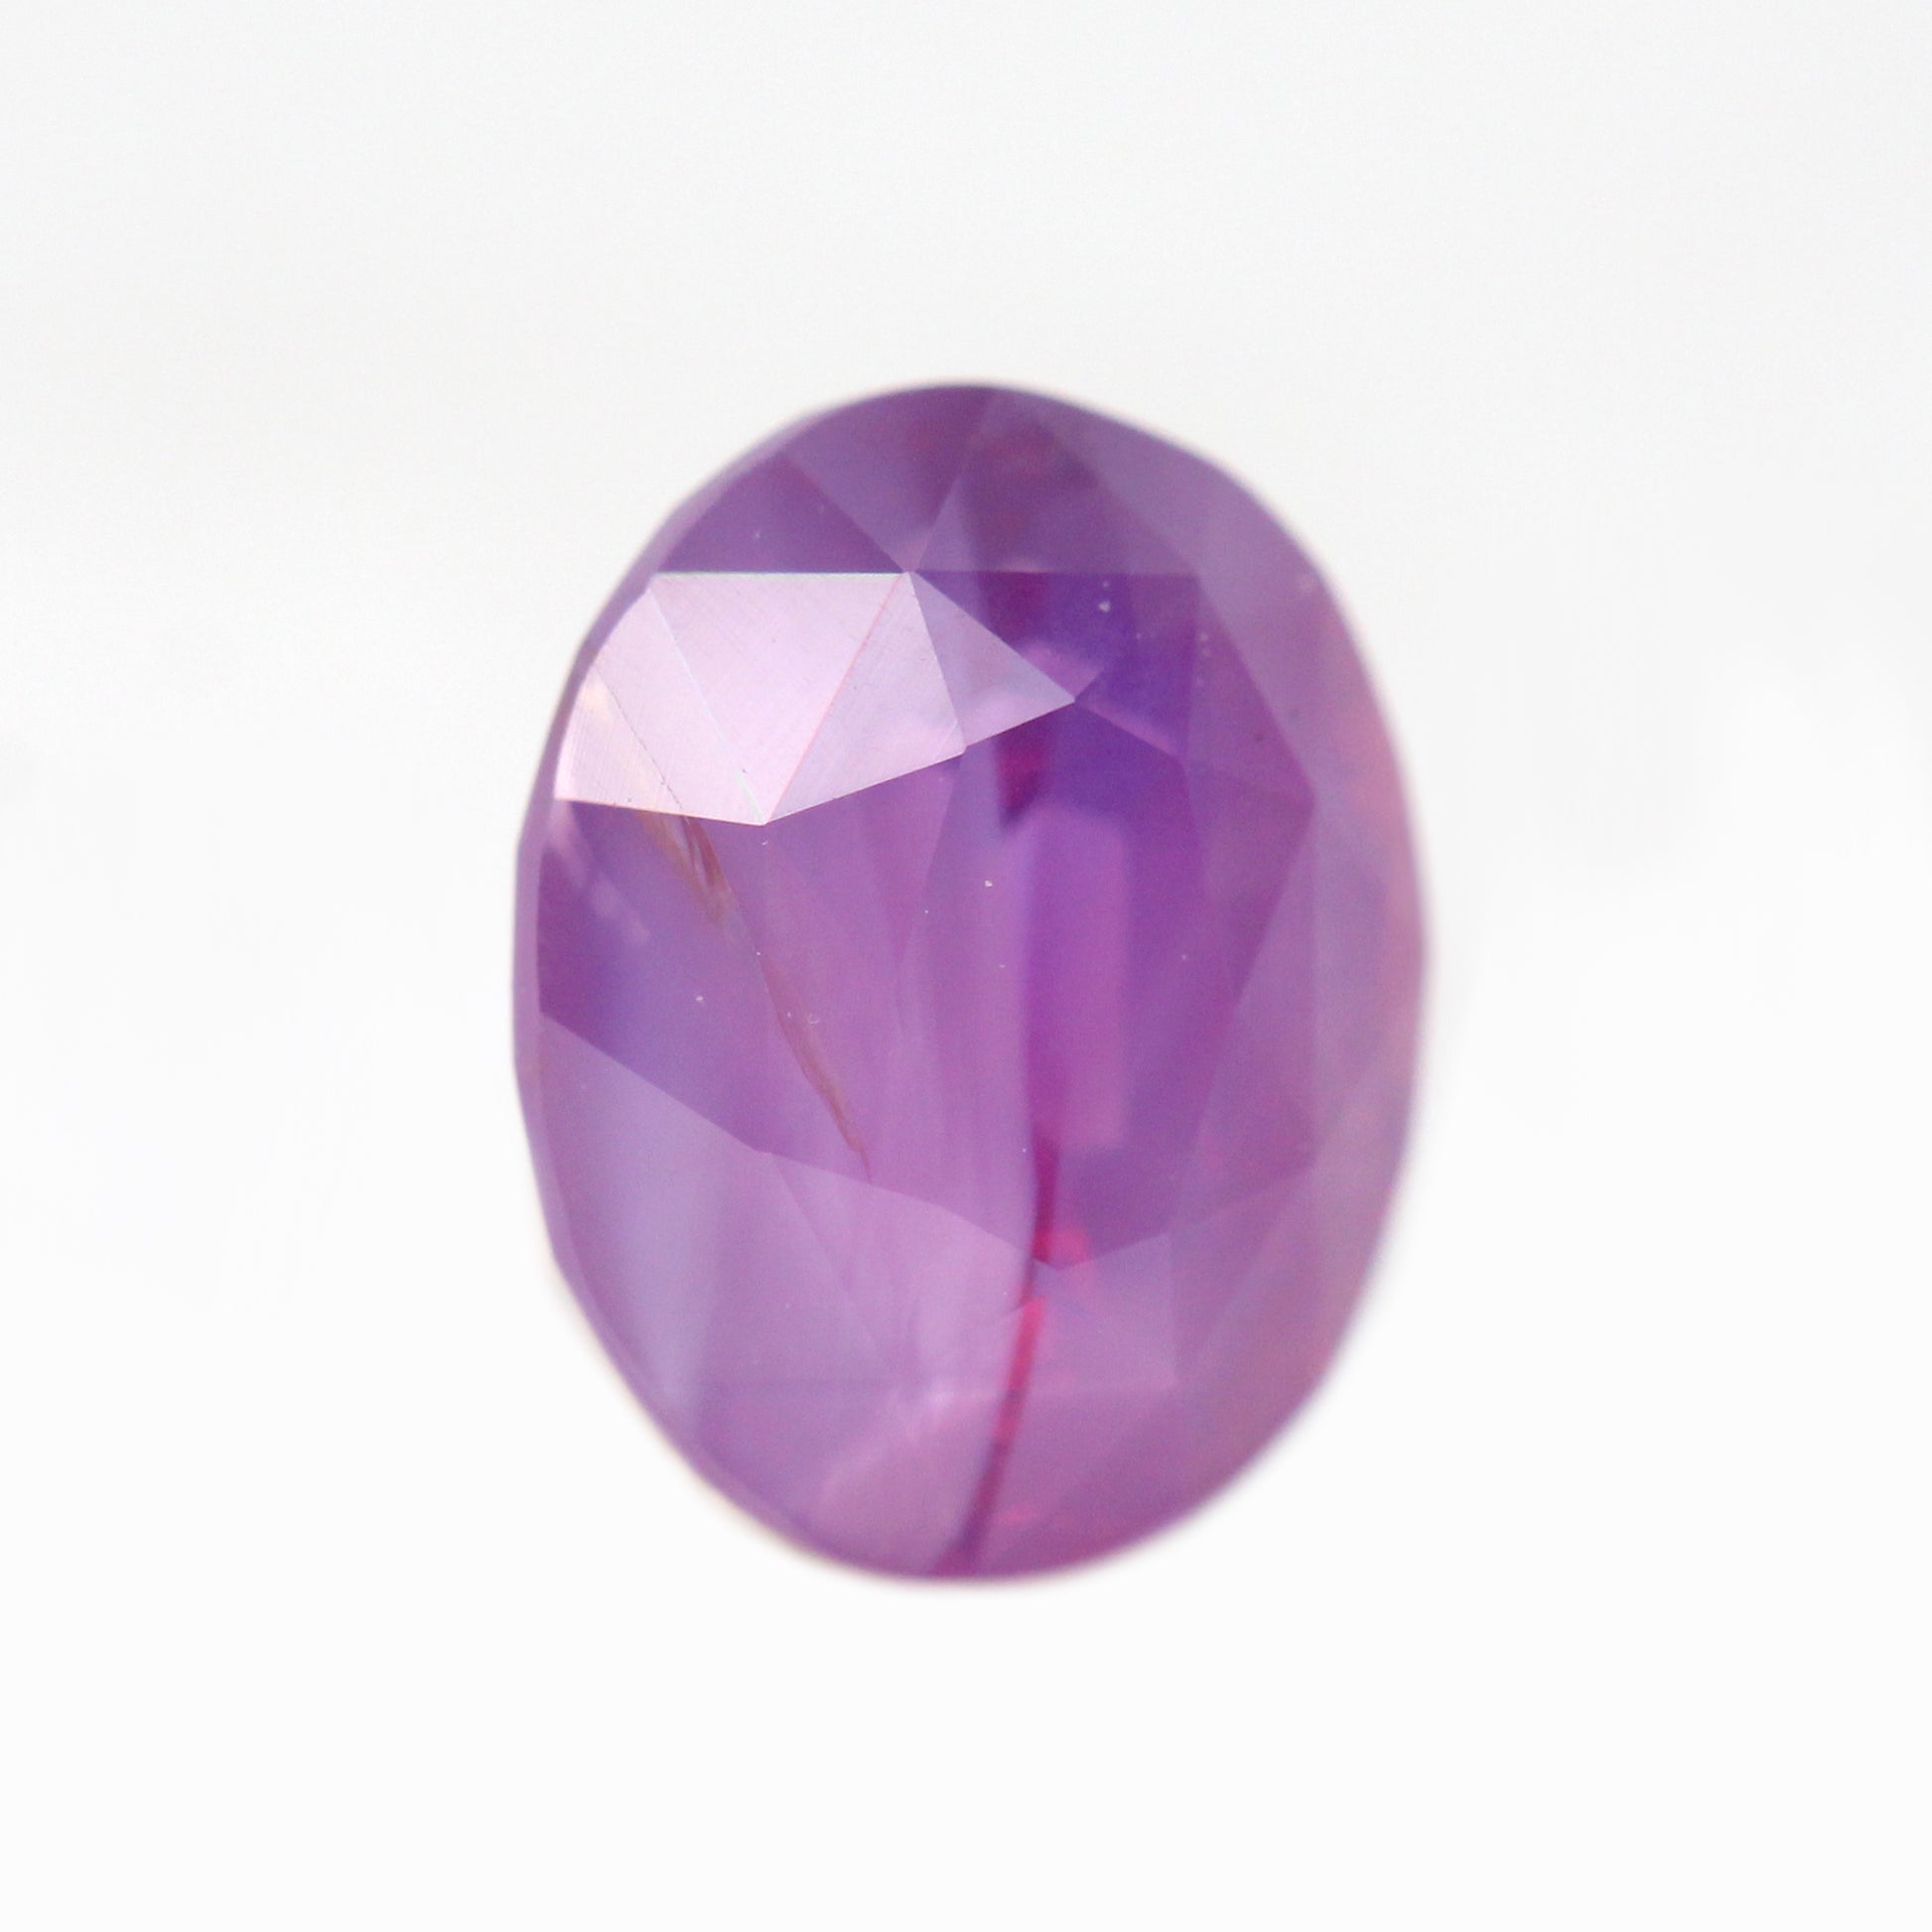 1.50 Carat Pink Purple Oval Sapphire for Custom Work - Inventory Code PPOS150 - Midwinter Co. Alternative Bridal Rings and Modern Fine Jewelry